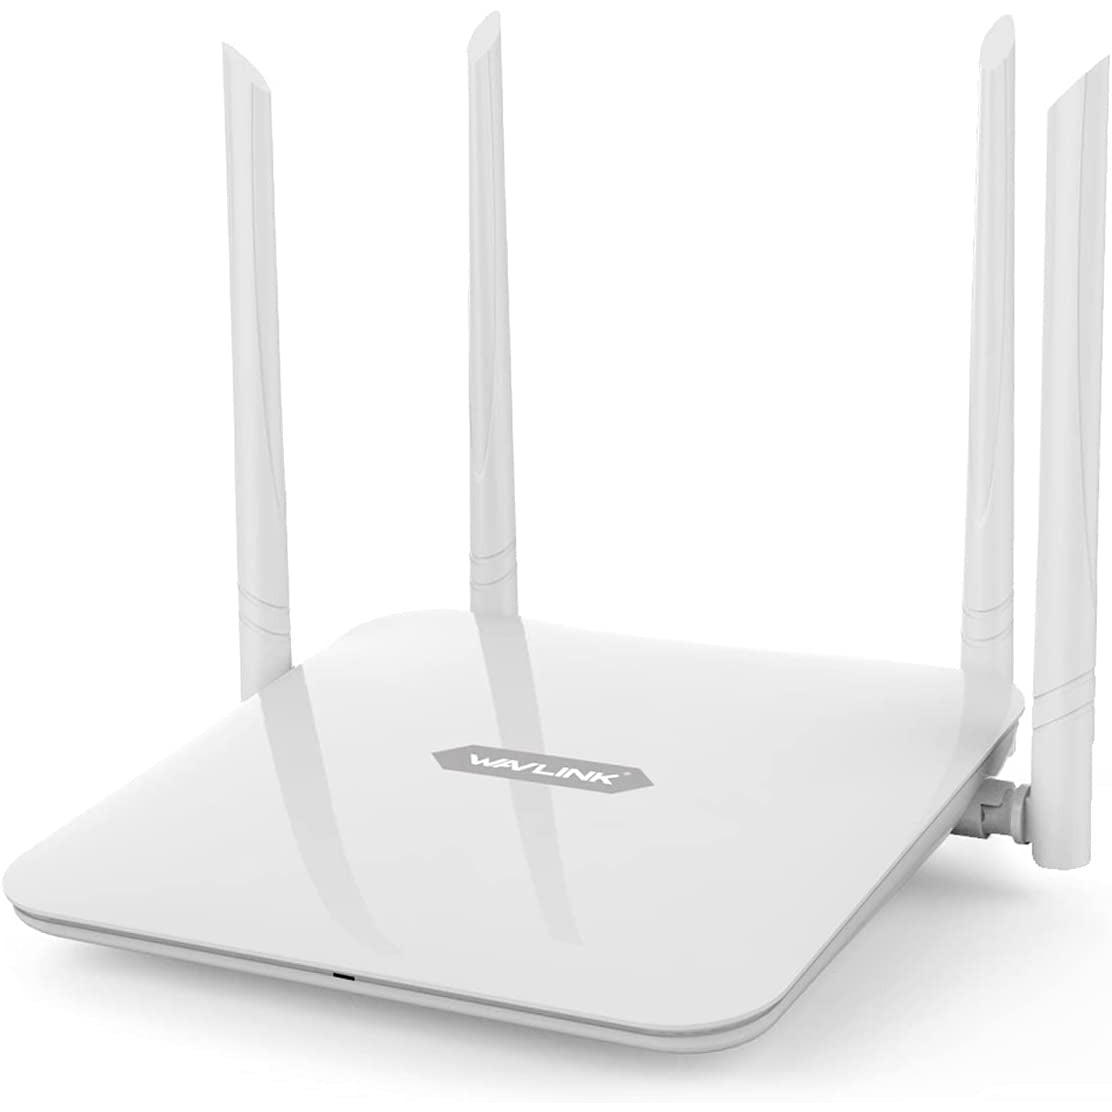 Wavlink AC1200 Dual-Band Wireless Router, High Speed Wi-Fi Router with 5dBi High Gain Antenna